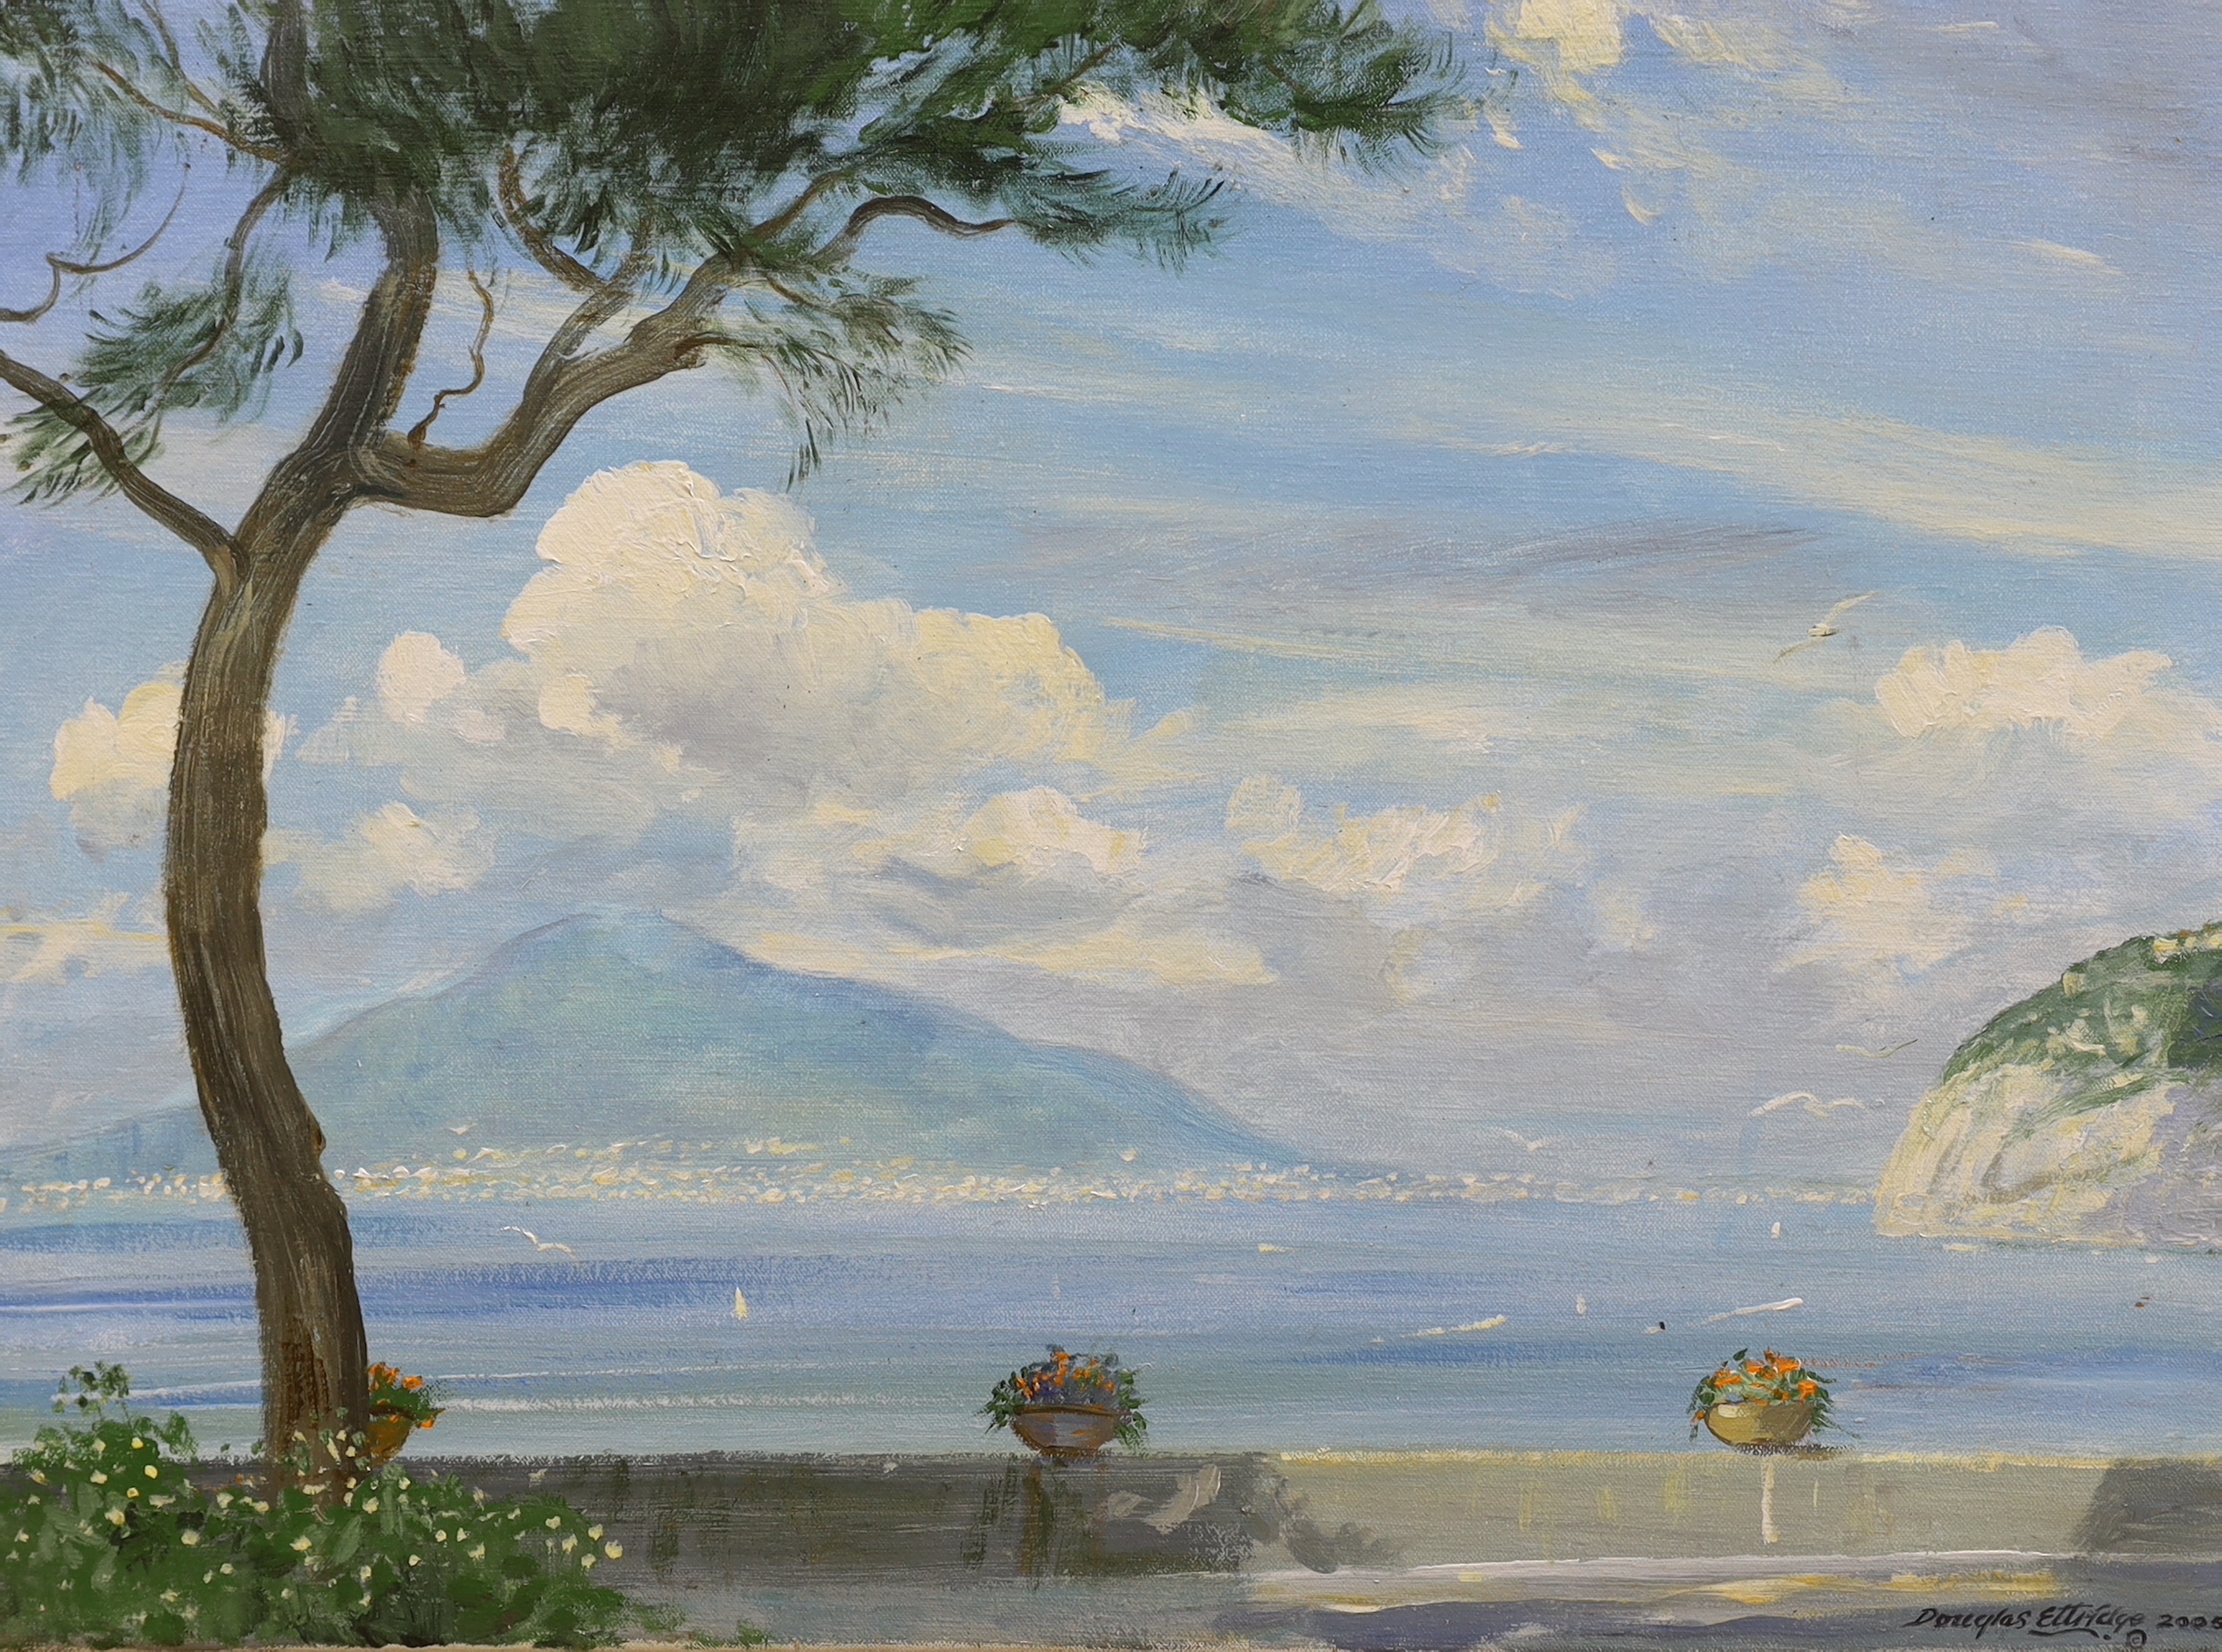 Douglas Ettridge (1927-2009), oil on canvas, Continental lakeside landscape, signed and dated 2005, 62 x 45cm, unframed